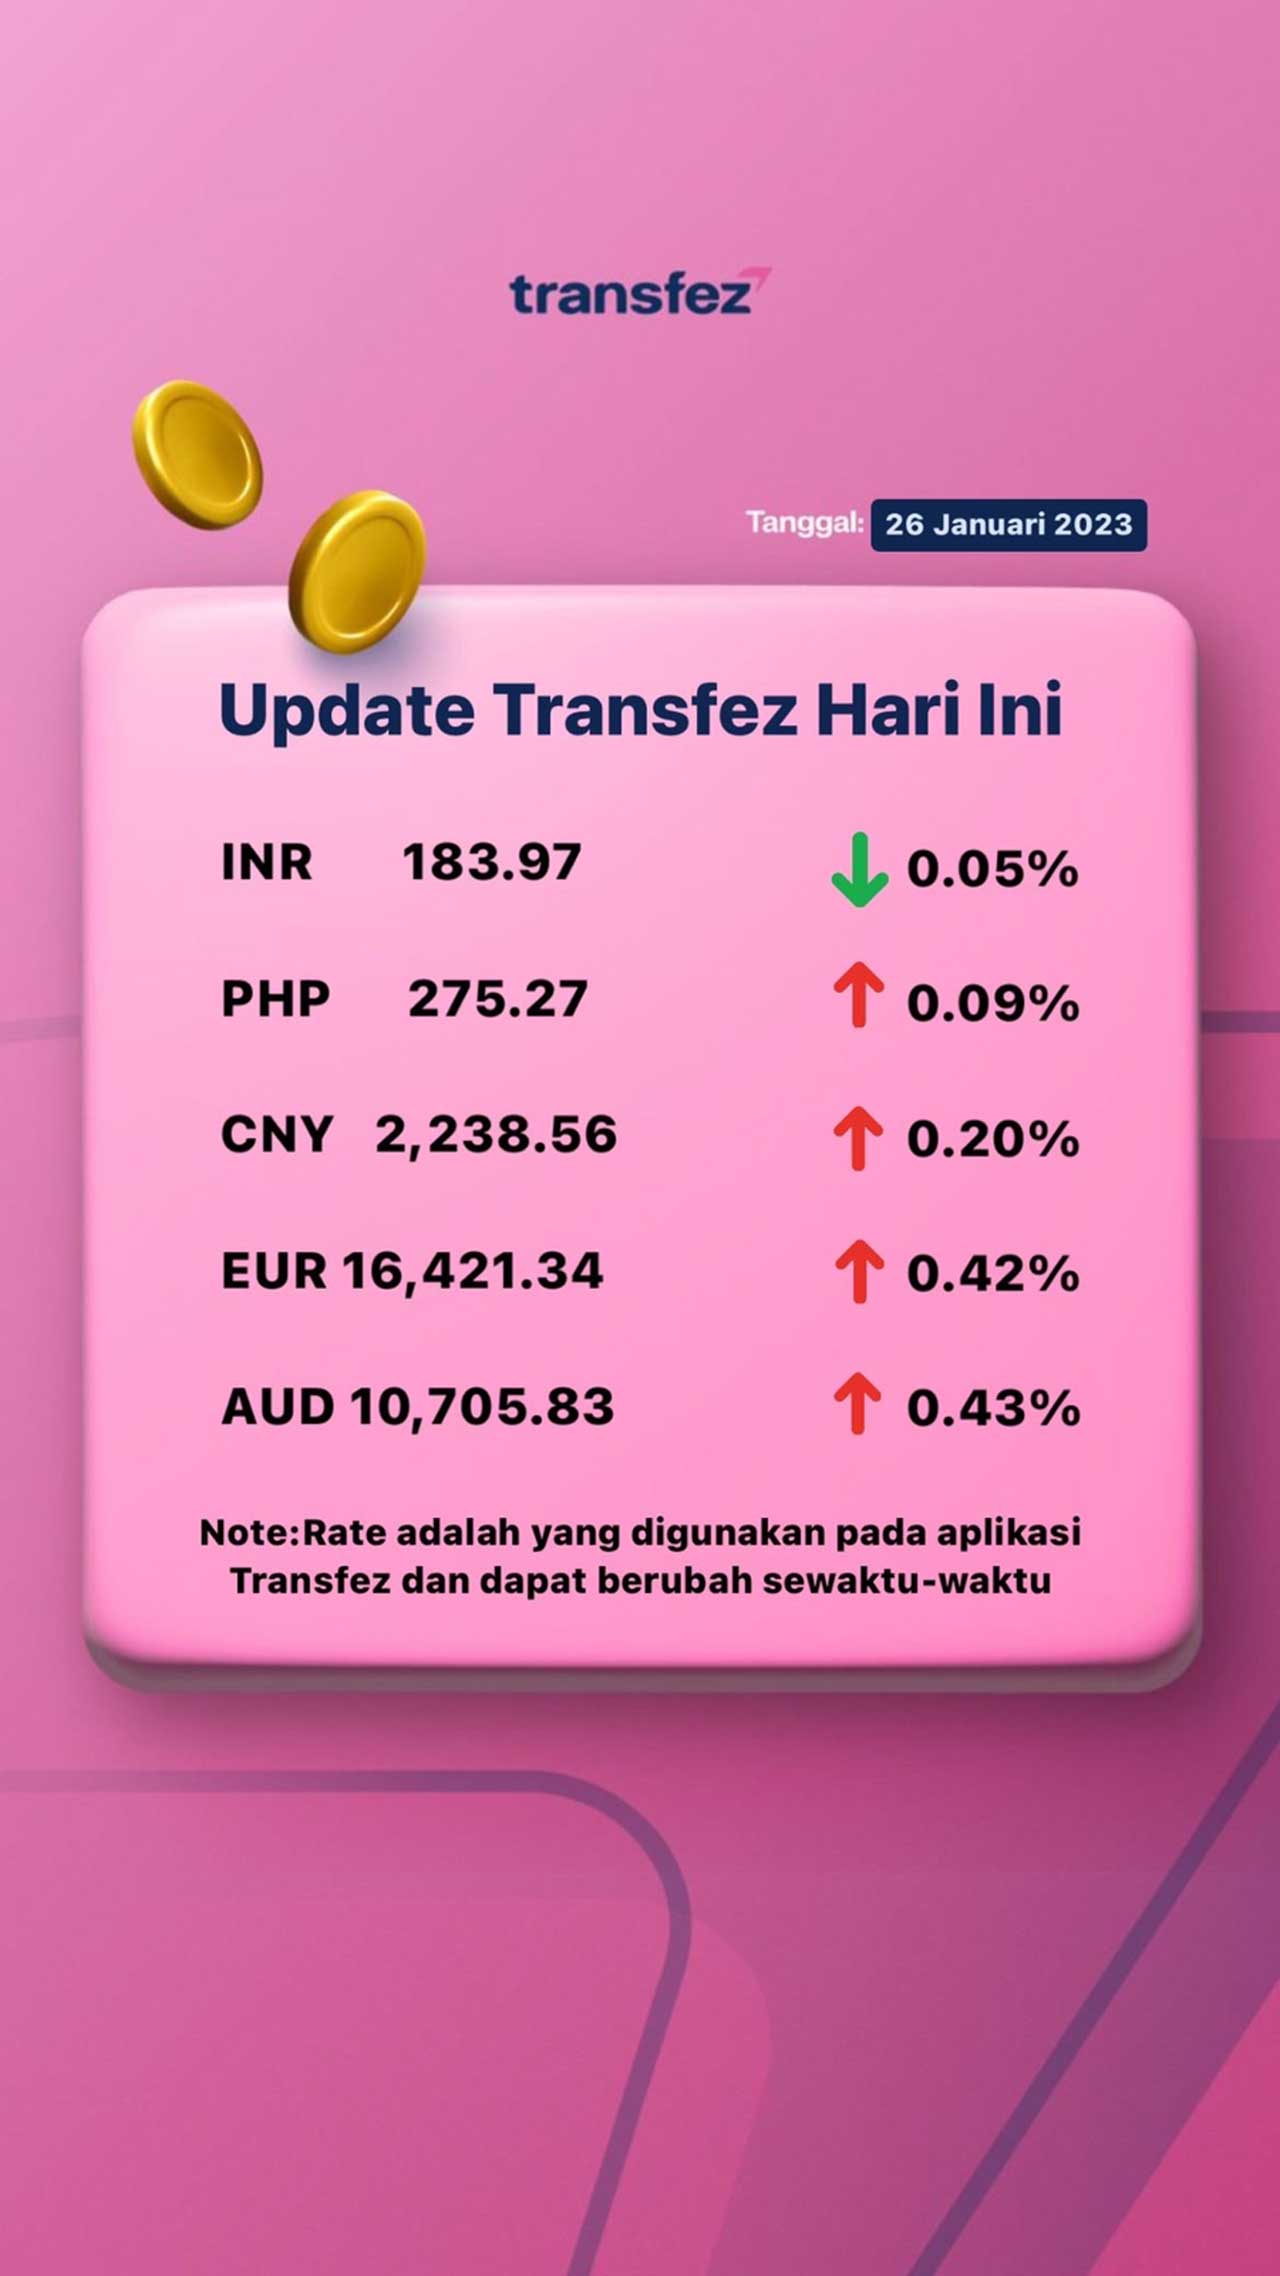 Today's Transfez Rate Update January 26 2023